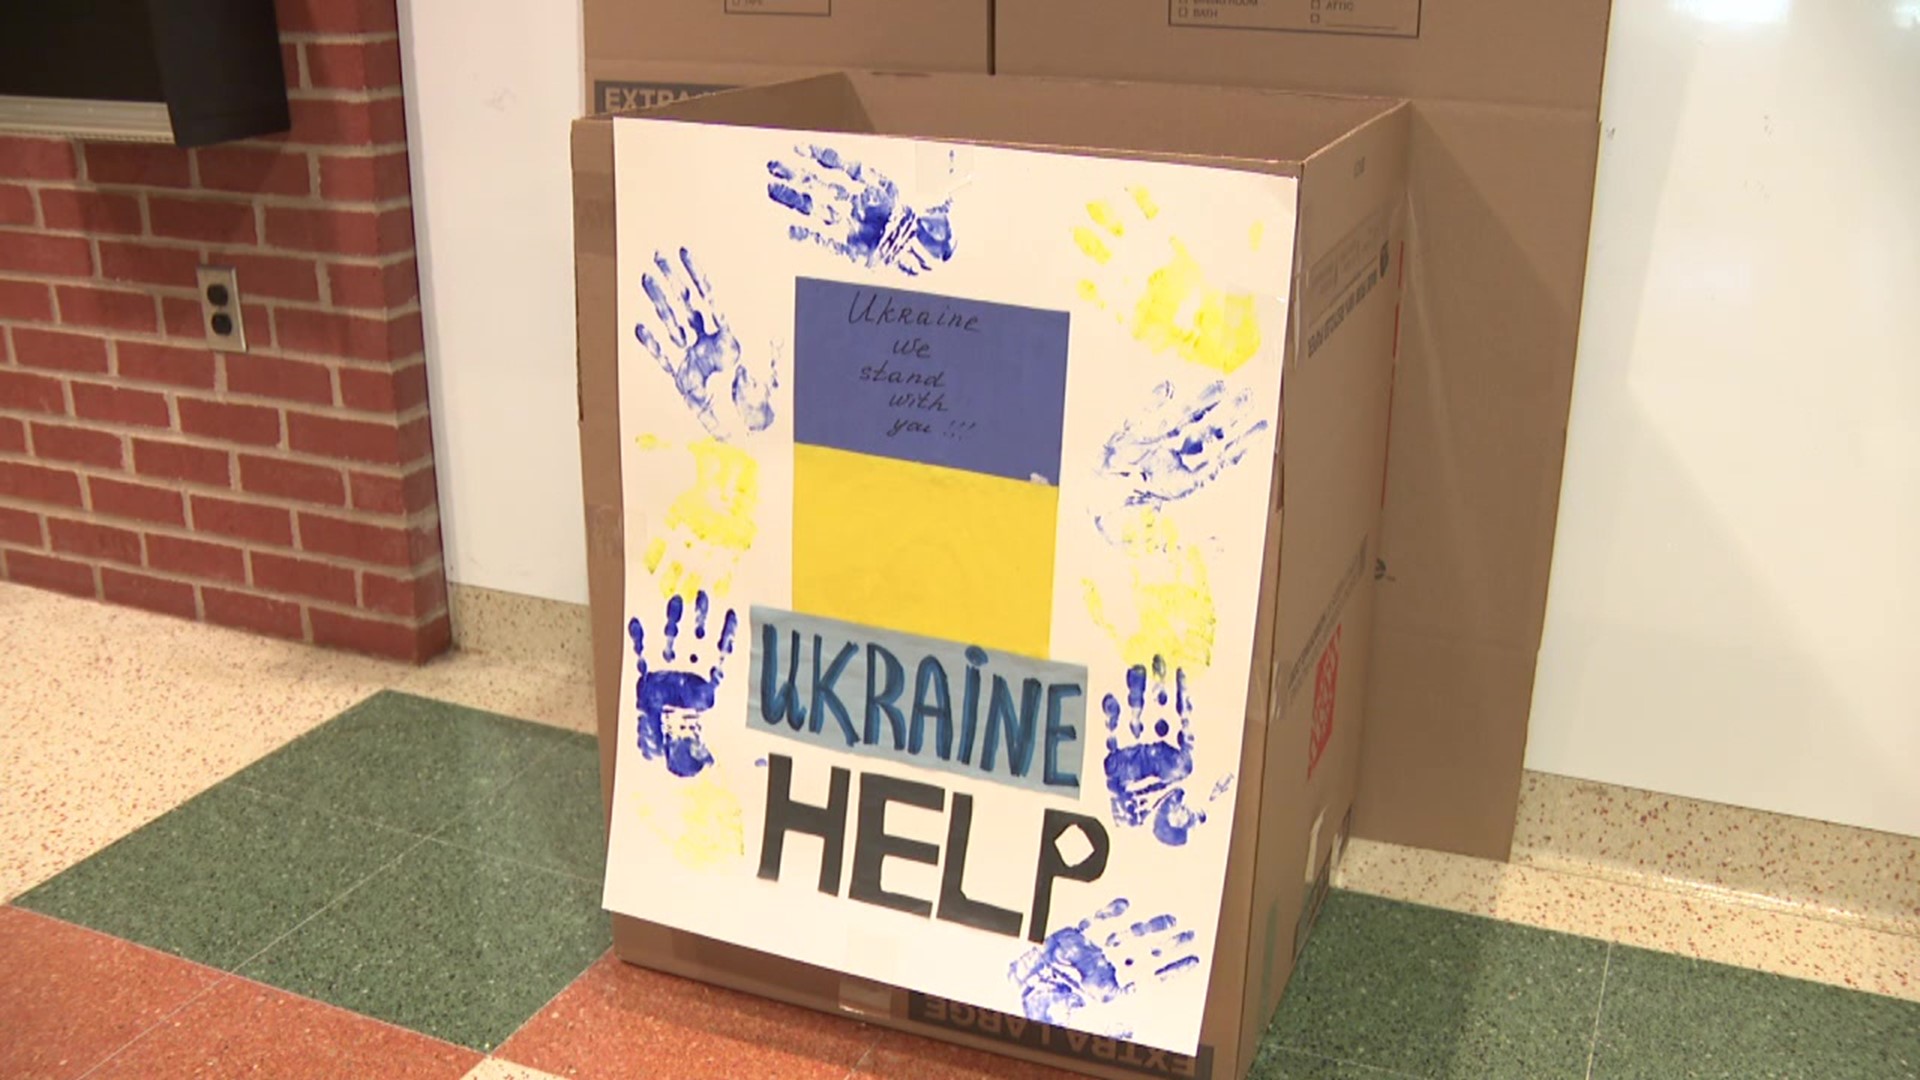 They're looking for donations of nonperishable goods, diapers, baby food, and medicine to send over to the people in Ukraine.